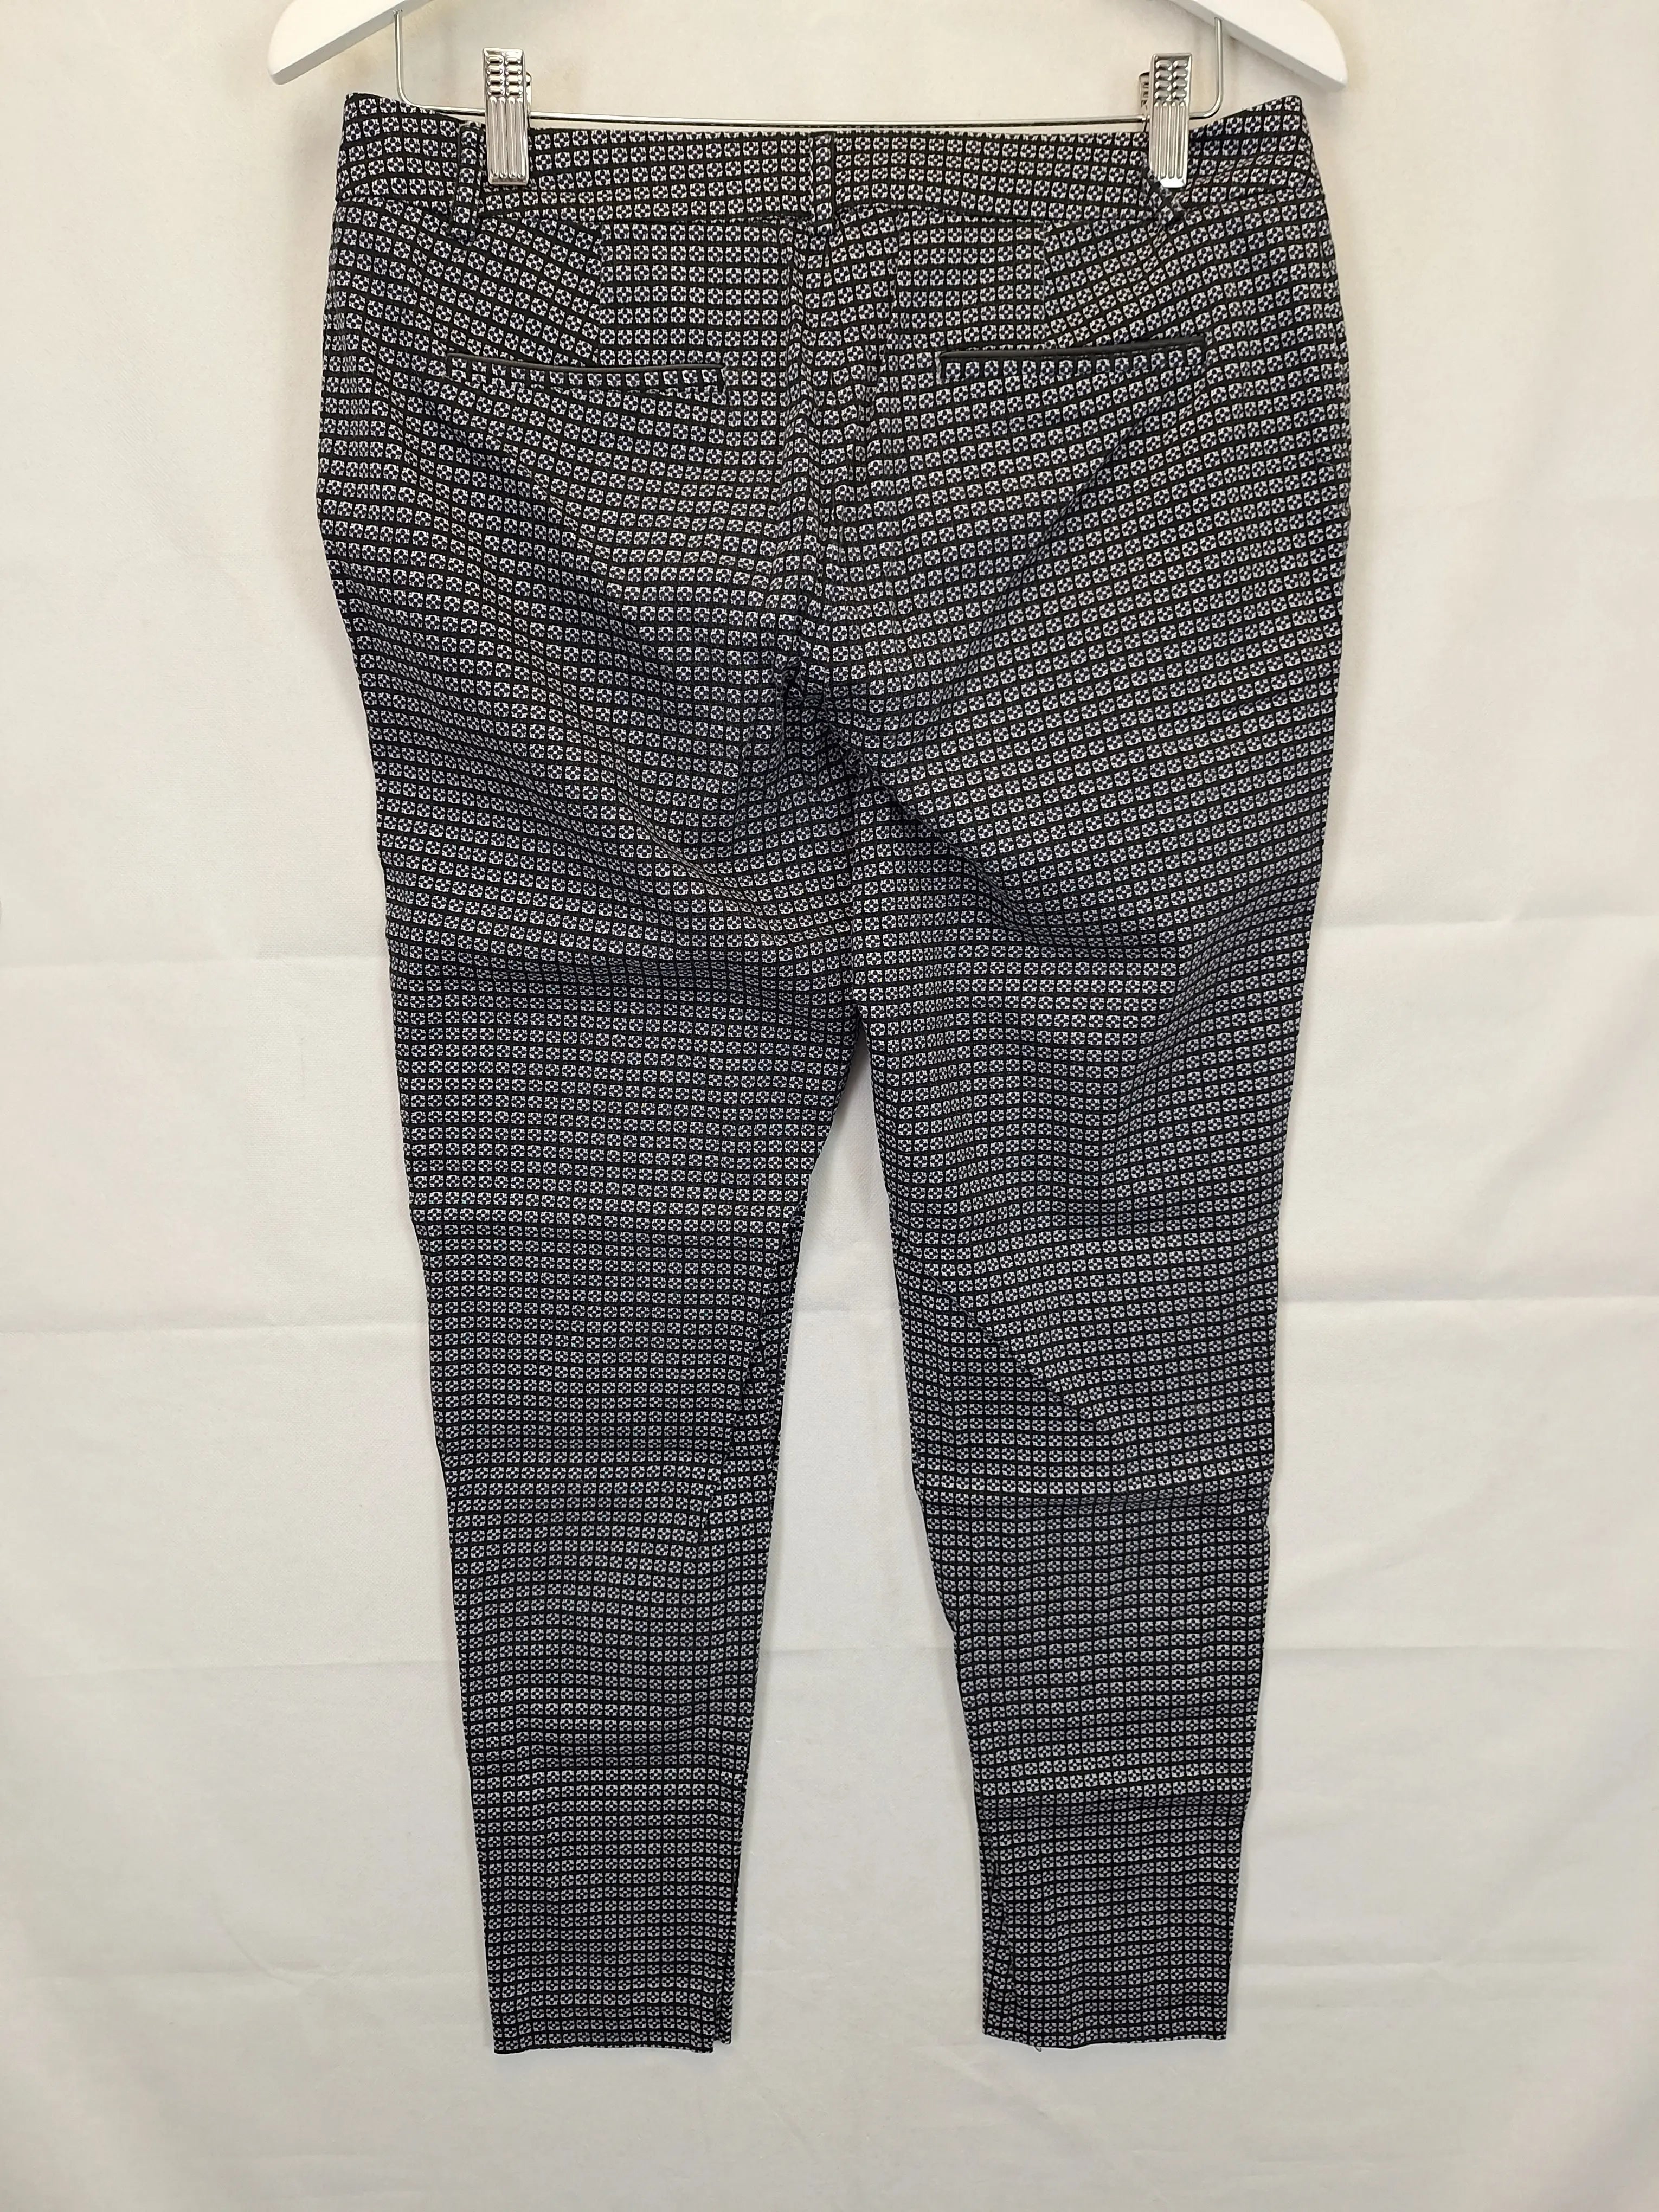 Portmans Tailored Slim Fit Pants Size 10 by SwapUp Online Second Hand Store Thrift Store Op Shop 21054250